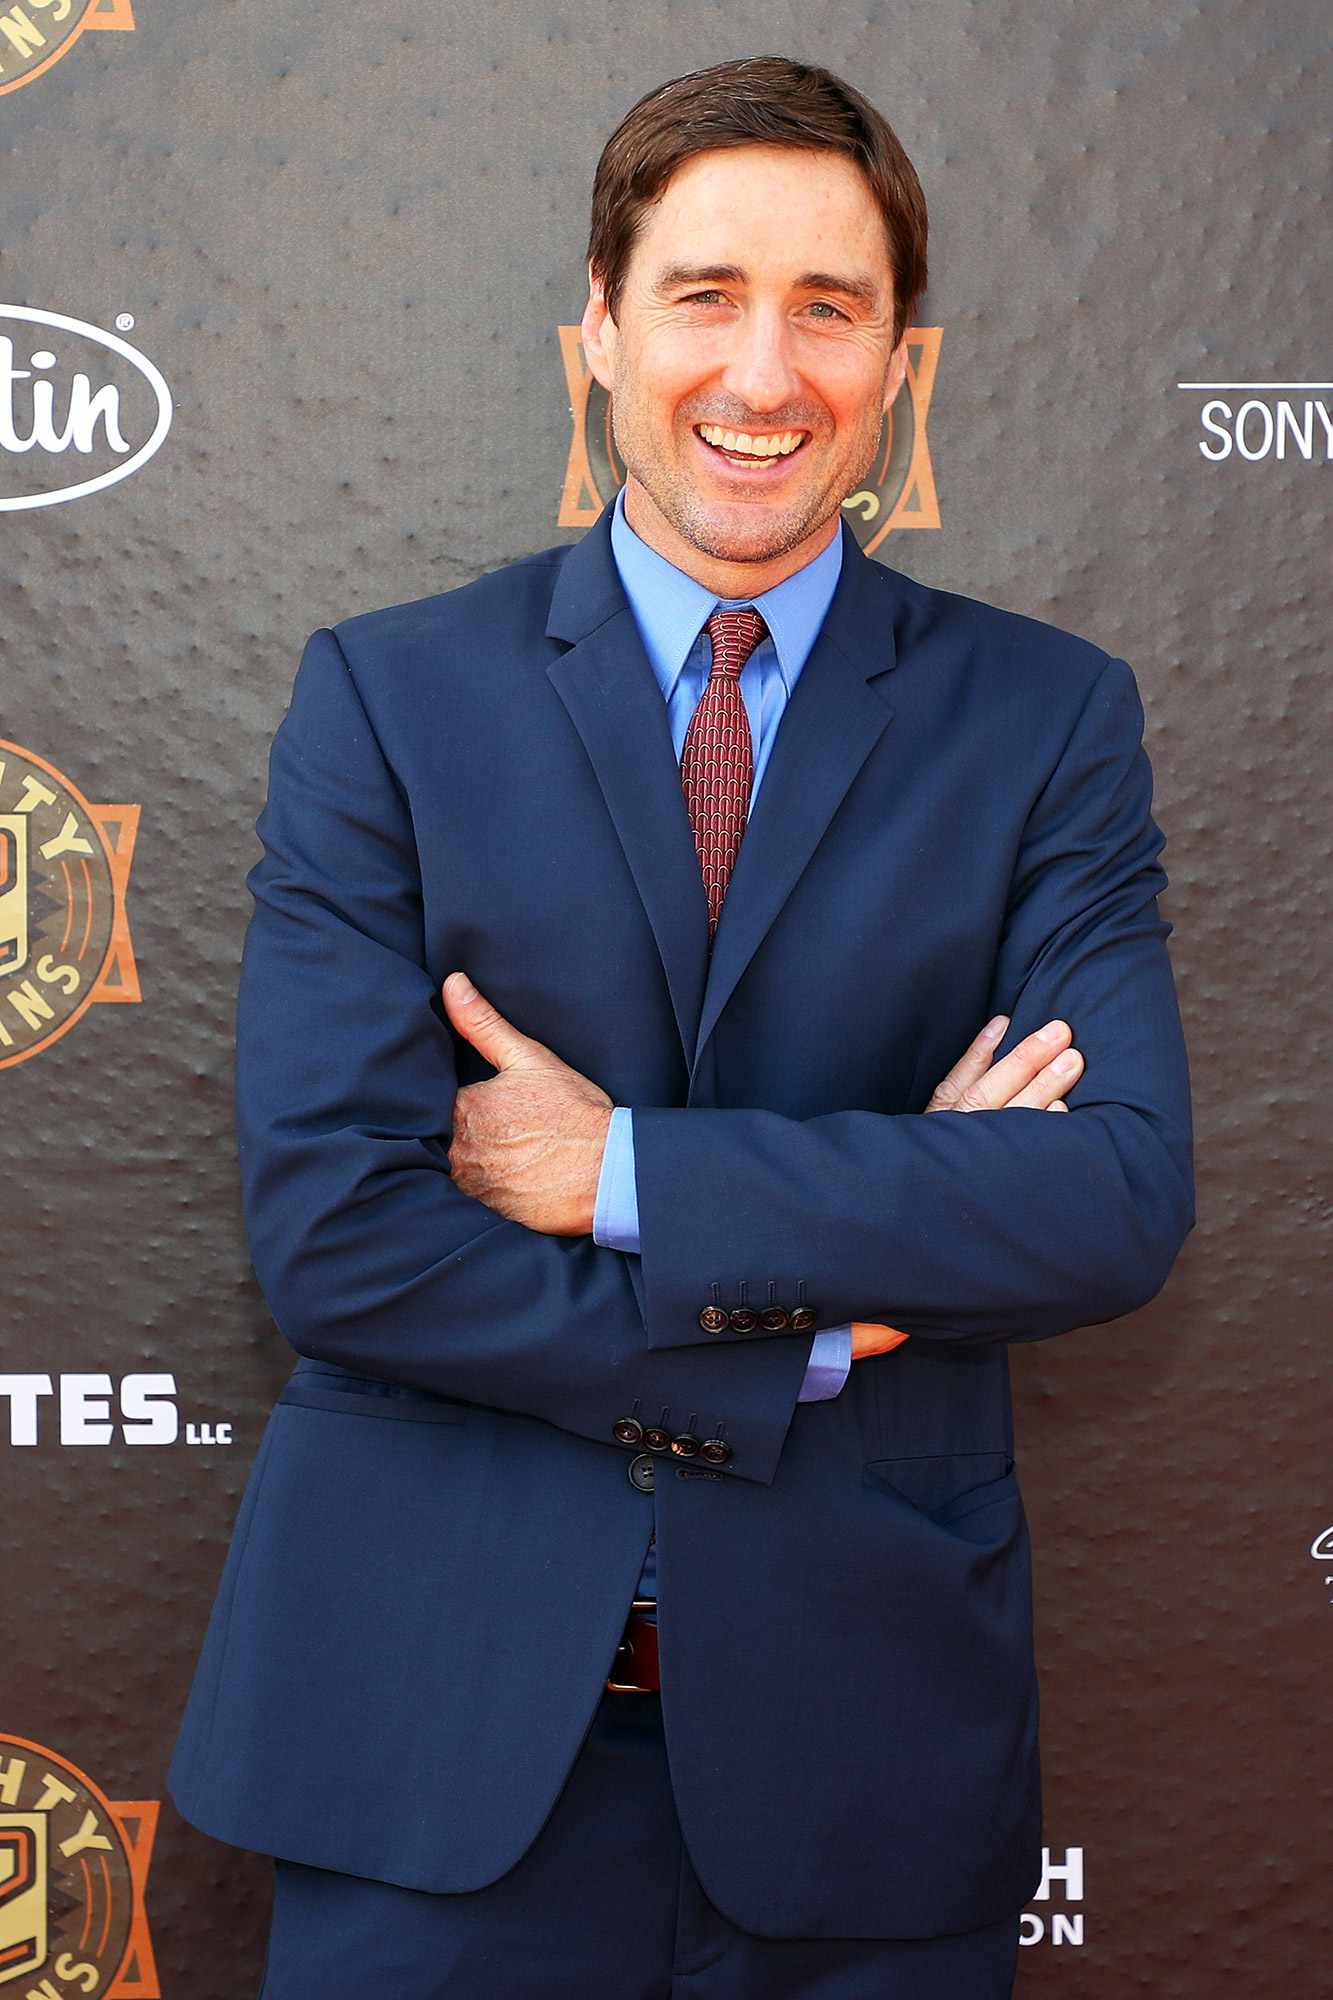 Luke Wilson attends the Fort Worth premiere of "12 Mighty Orphans" at ISIS Theater on June 07, 2021 in Fort Worth, Texas